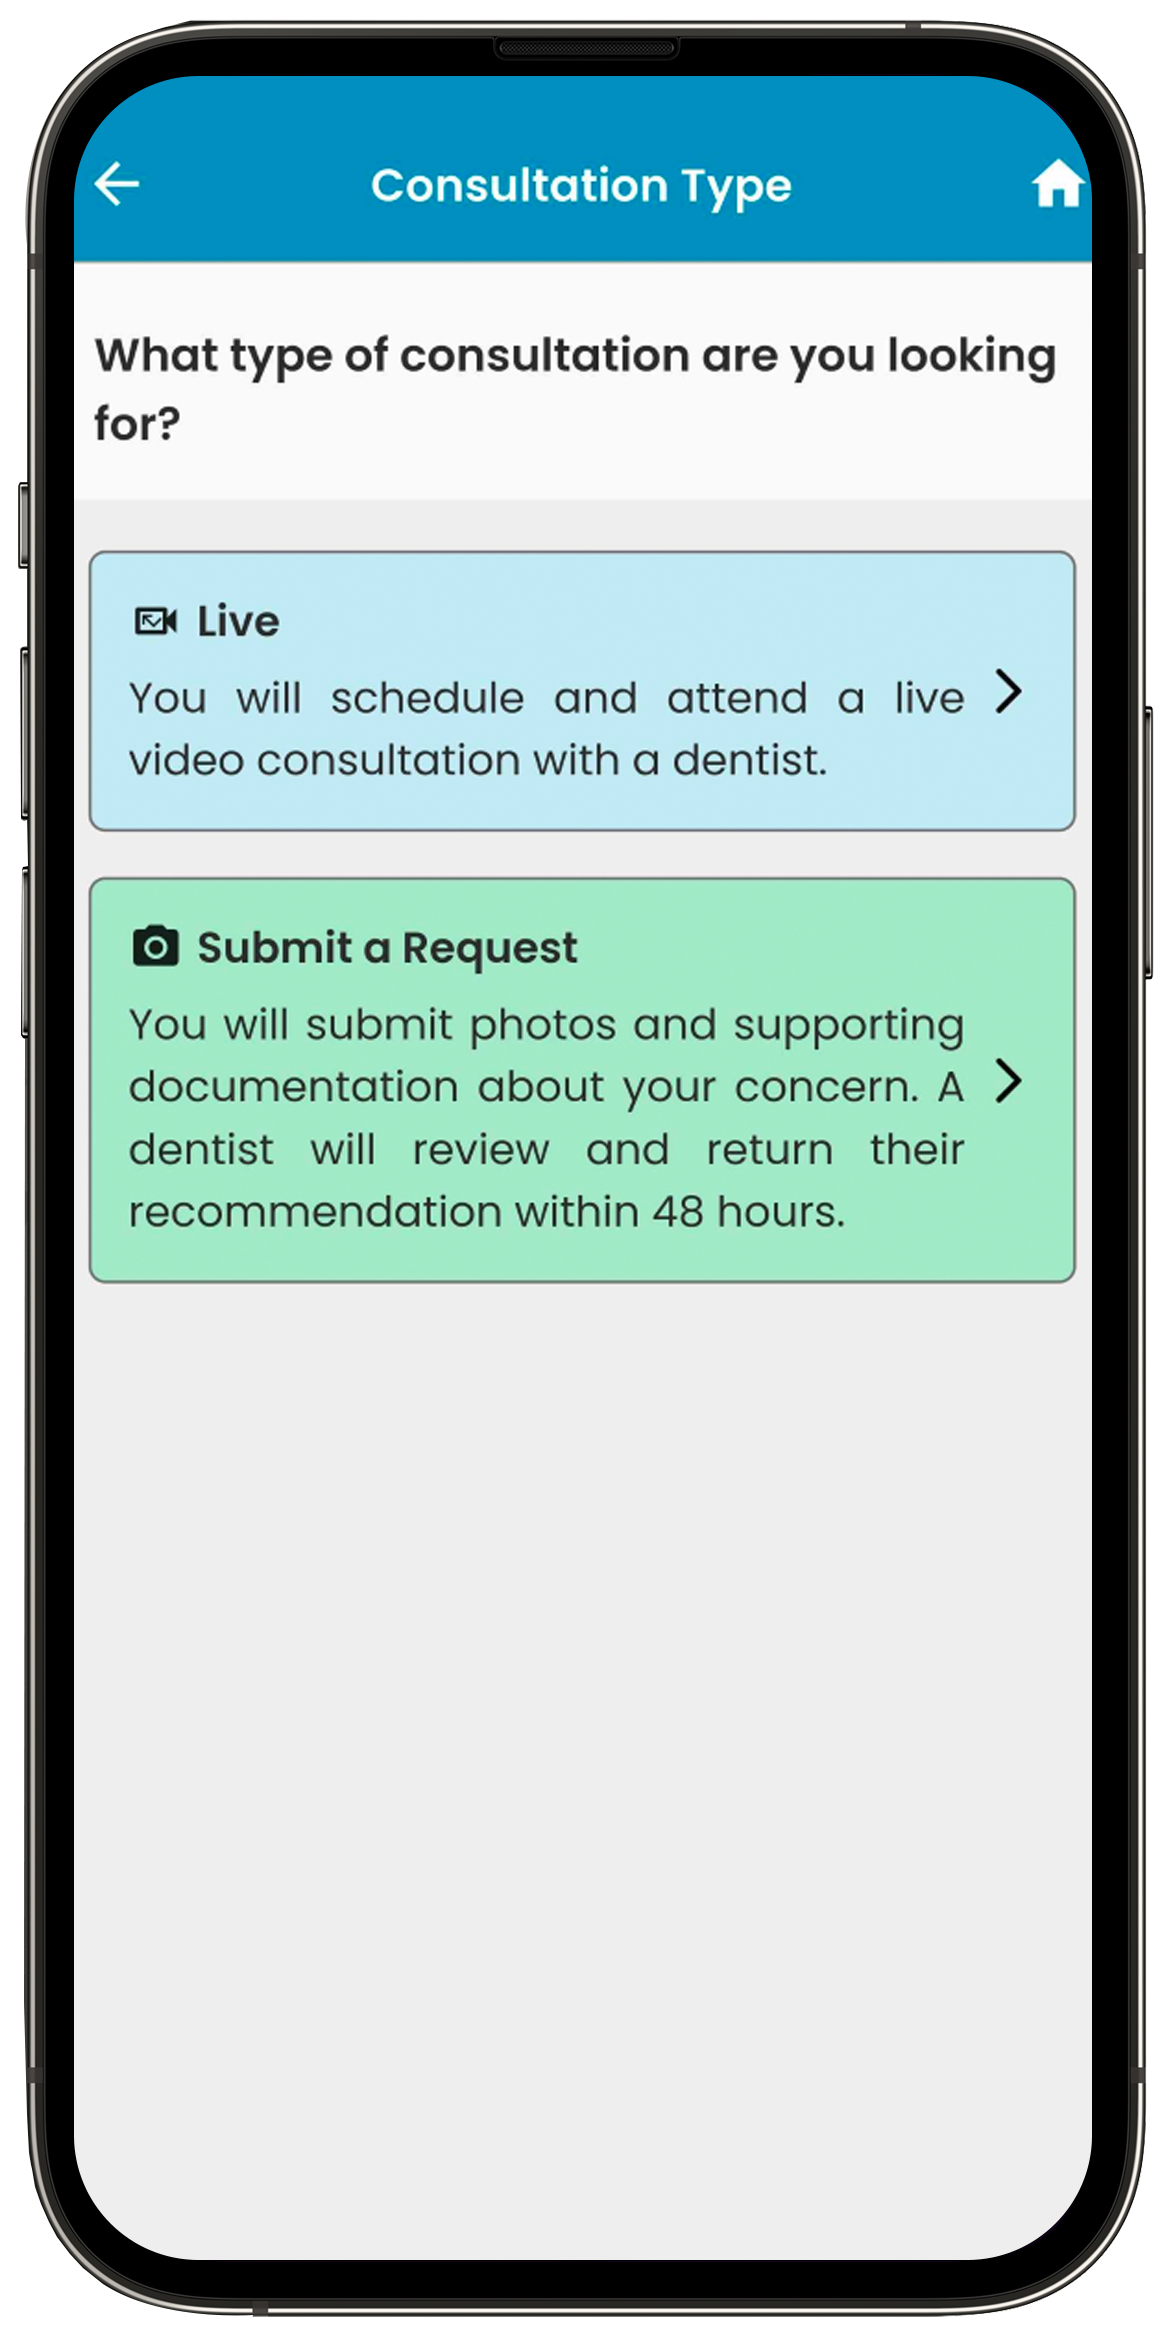 DigiBite teledentistry app consultation type screen choose a live consultation or submit a request